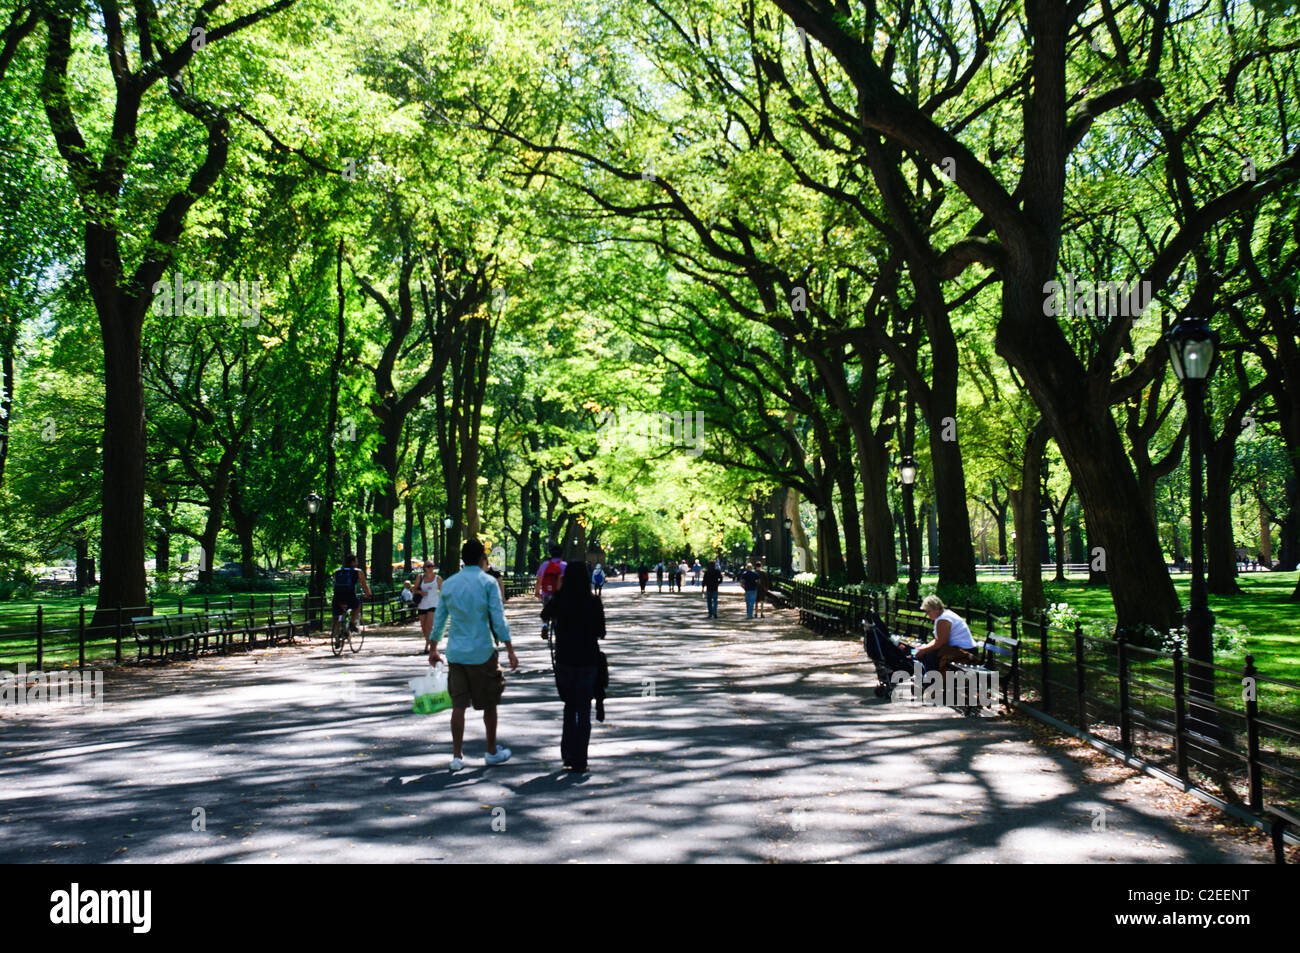 The Mall and Literary Walk with American elm trees forming canopy, pedestrian pathway, Central Park, Manhattan, NYC Stock Photo